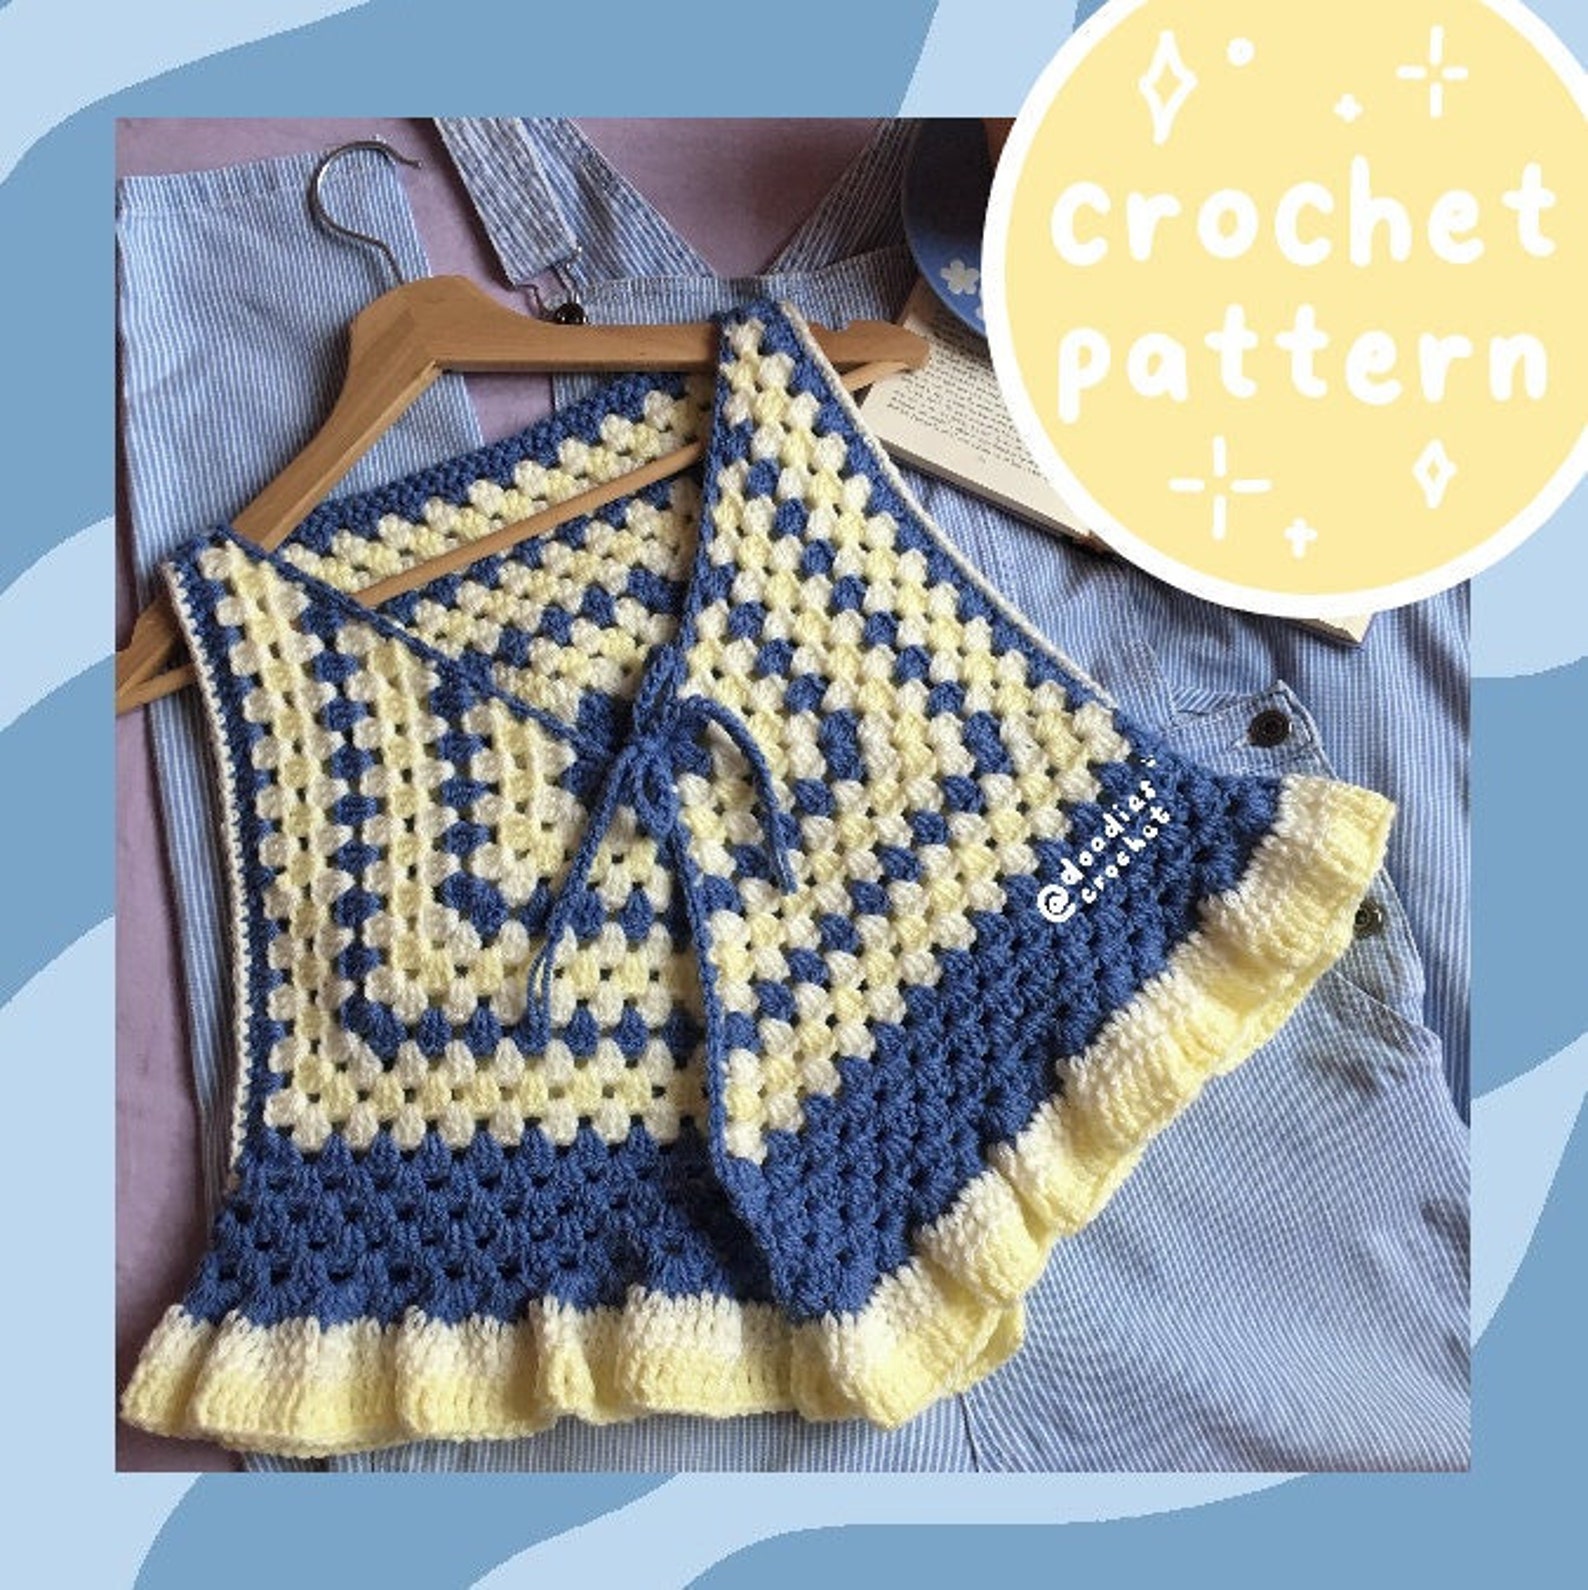 A small blue and yellow vest or waistcoat. It is a granny square striped pattern with ruffles along the bottom edge.